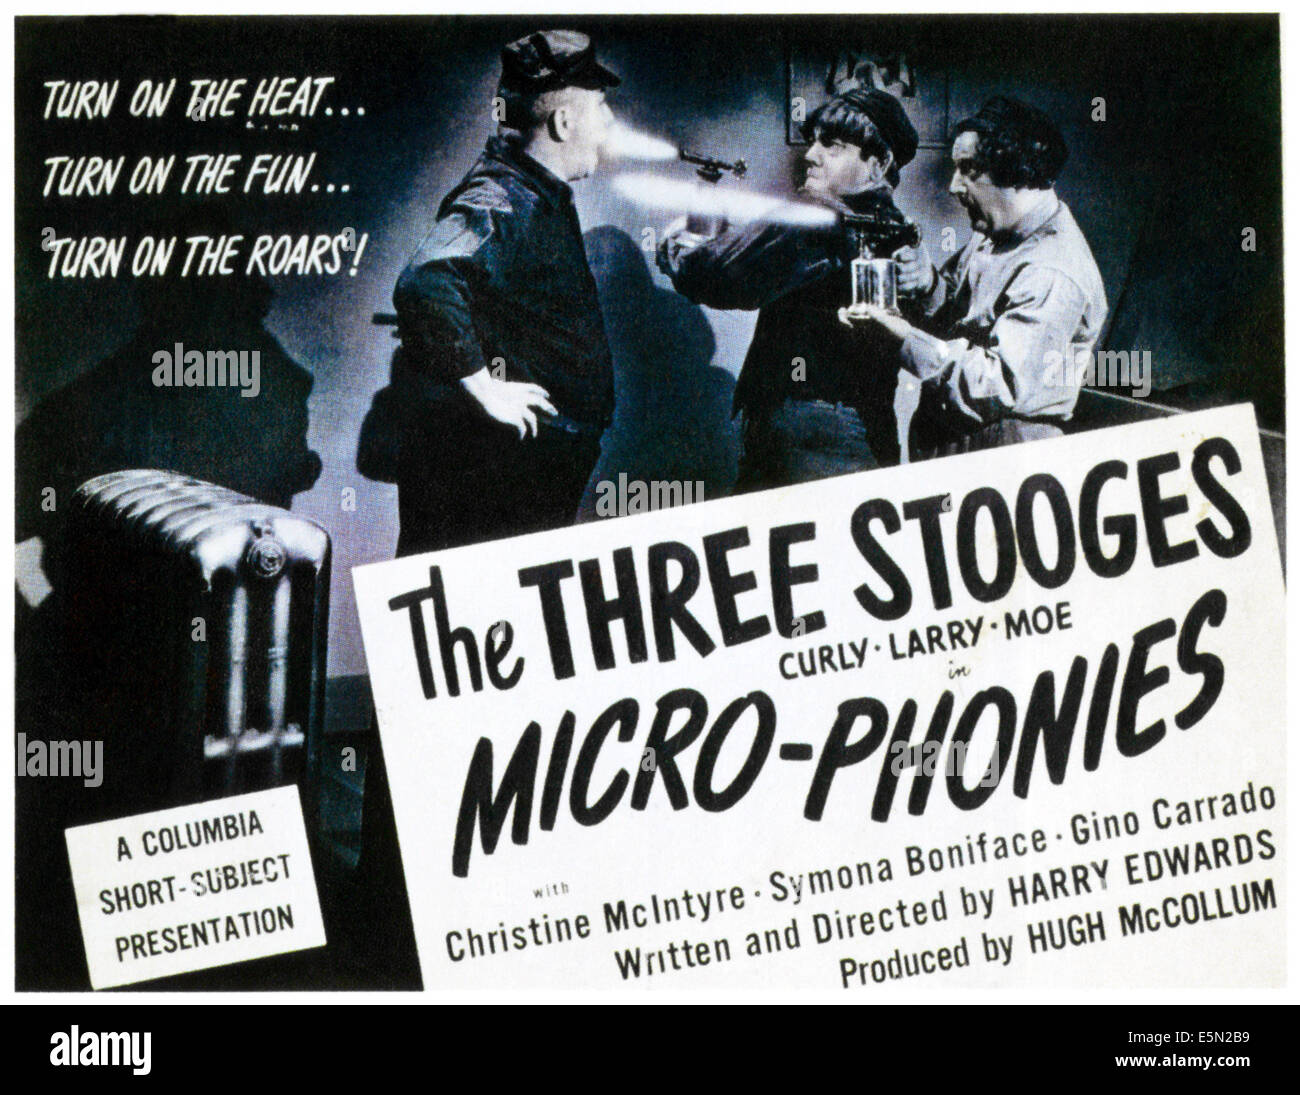 MICRO-PHONIES, The Three Stooges from left: Curly Howard, Moe Howard, Larry Fine on title card, 1945. Stock Photo